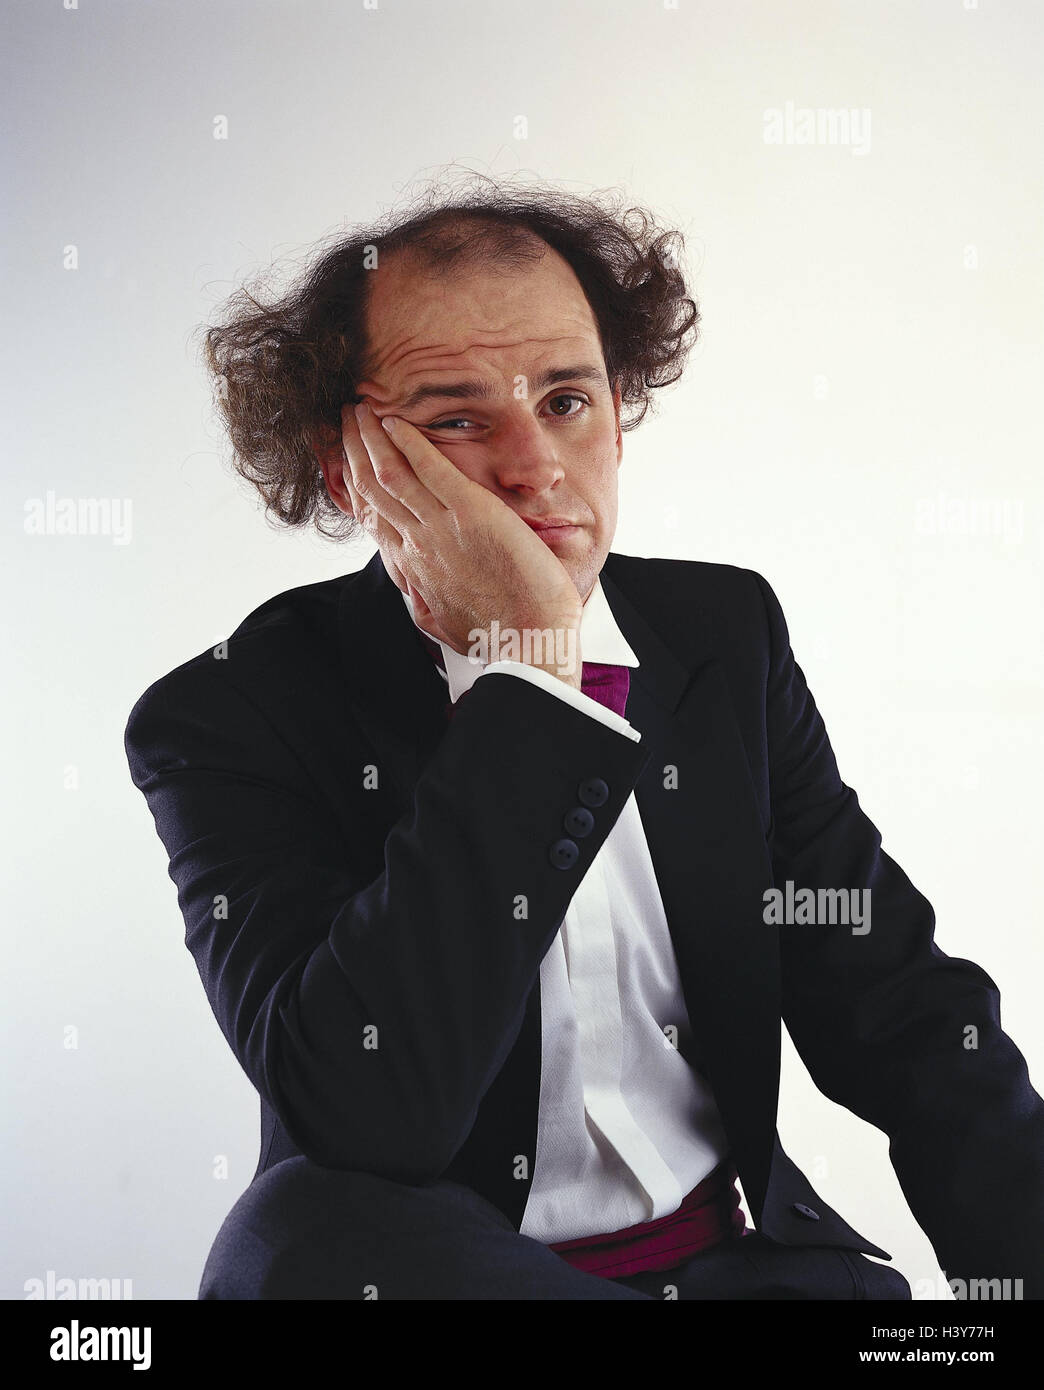 Man, clothes, festively, gesture, bored, half portrait, suit, fly, elegantly, head, rest on, boredom, boringly, sadly, sadness, suppressed, dejection, inside, studio, near, cut out, Stock Photo